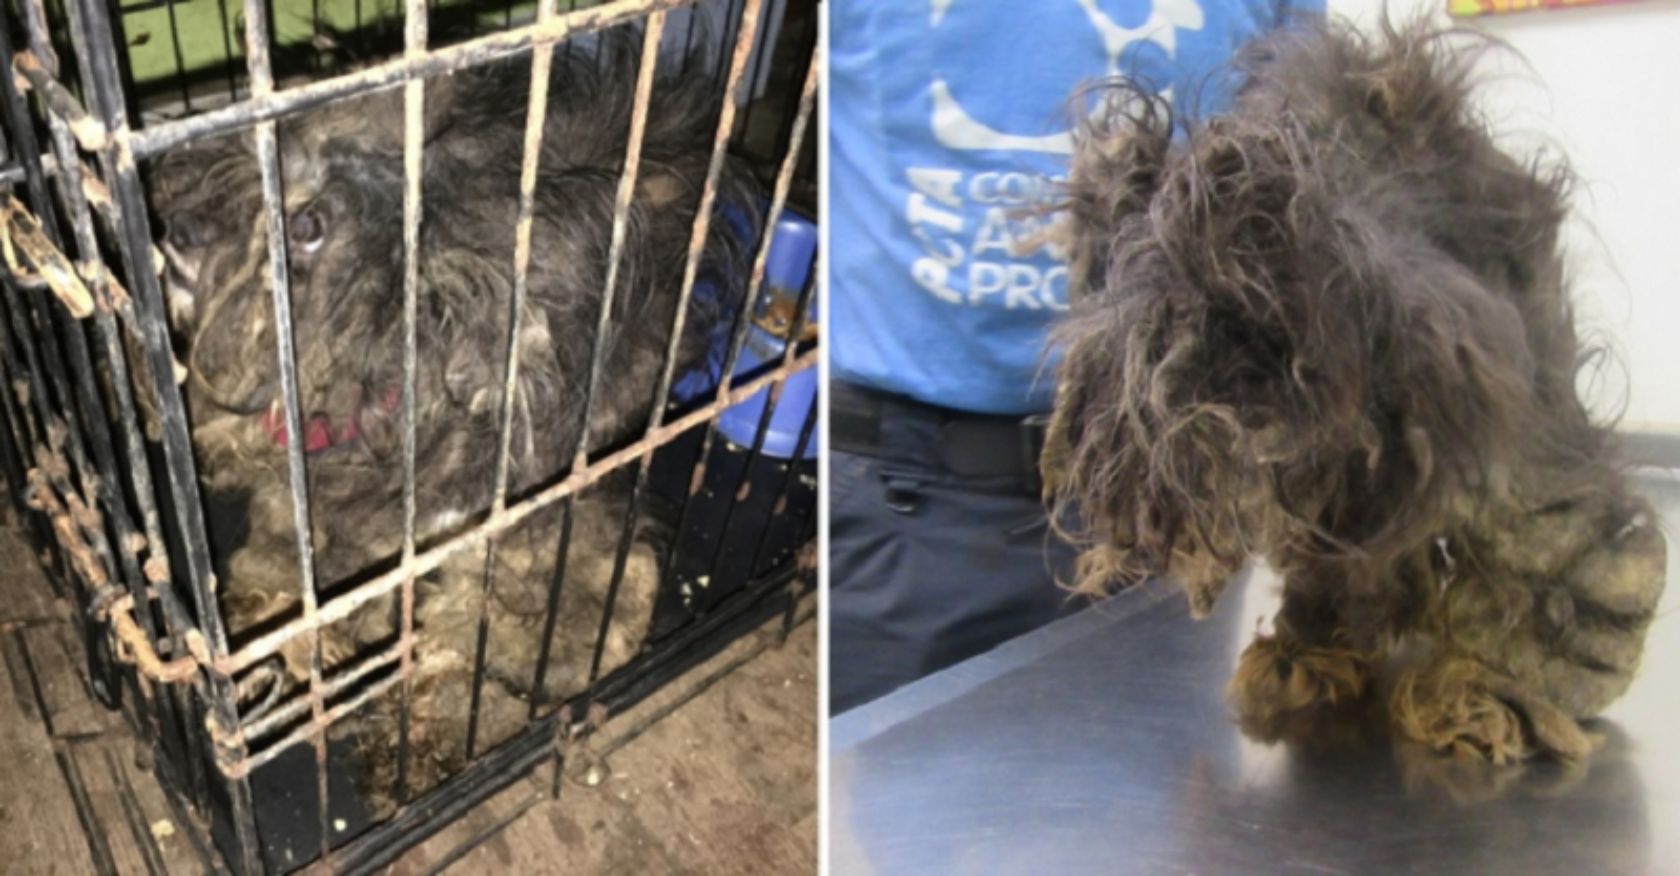 Following essential treatment, an abused dog undergoes a remarkable transformation, becoming unrecognizable and demonstrating the incredible power of care and rehabilitation.